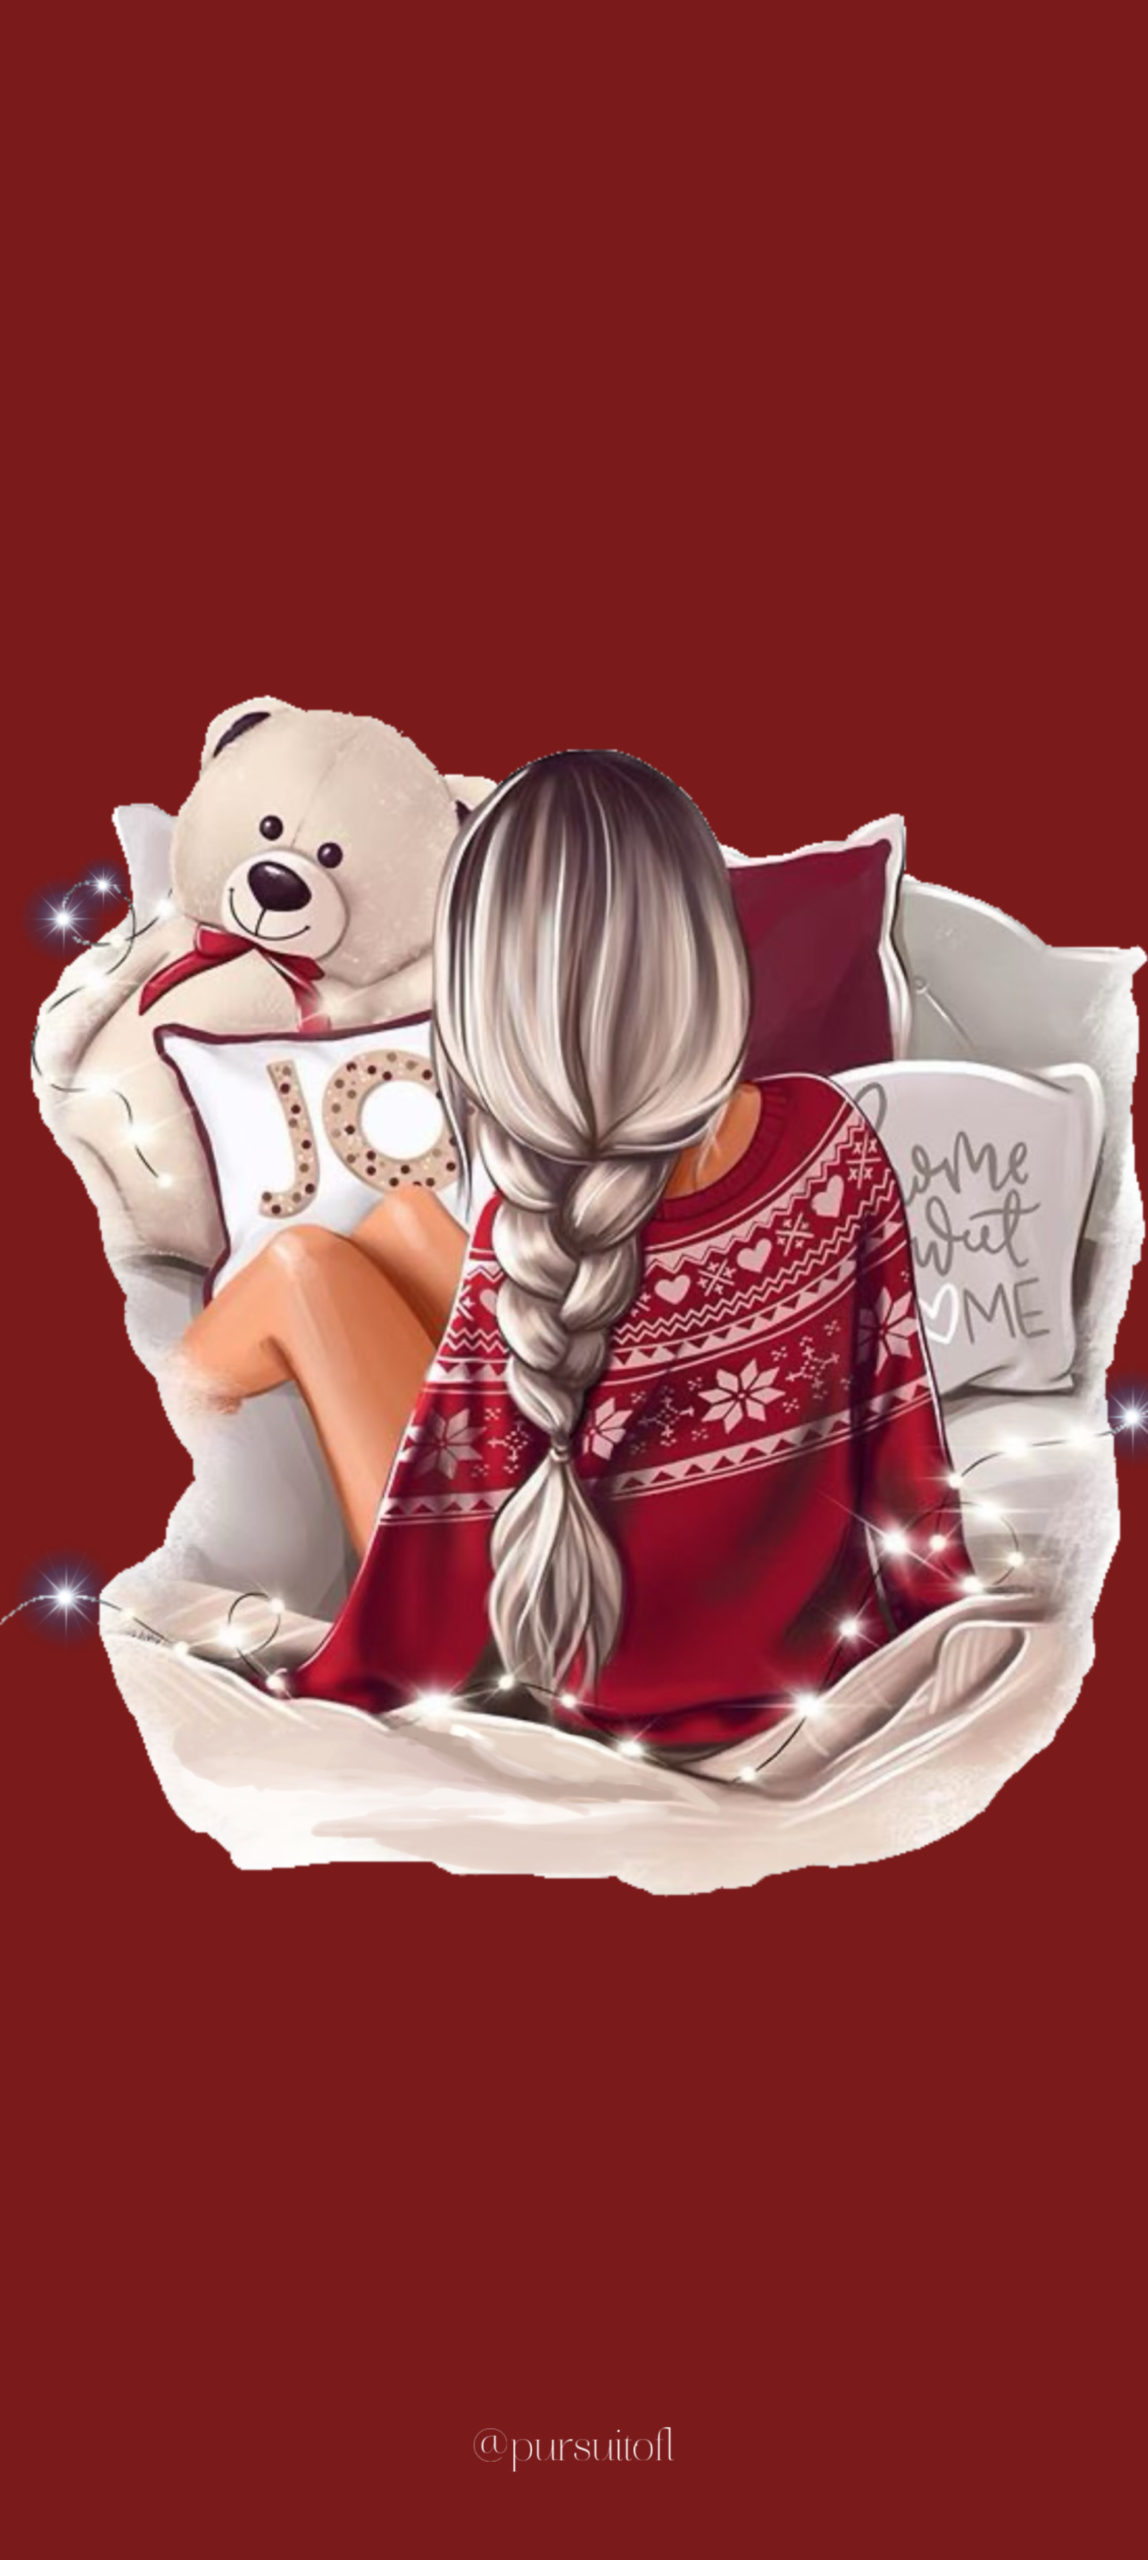 Red winter phone wallpaper with girl with braid wearing red sweater sitting on blanket with pillows, teddy bear and lights